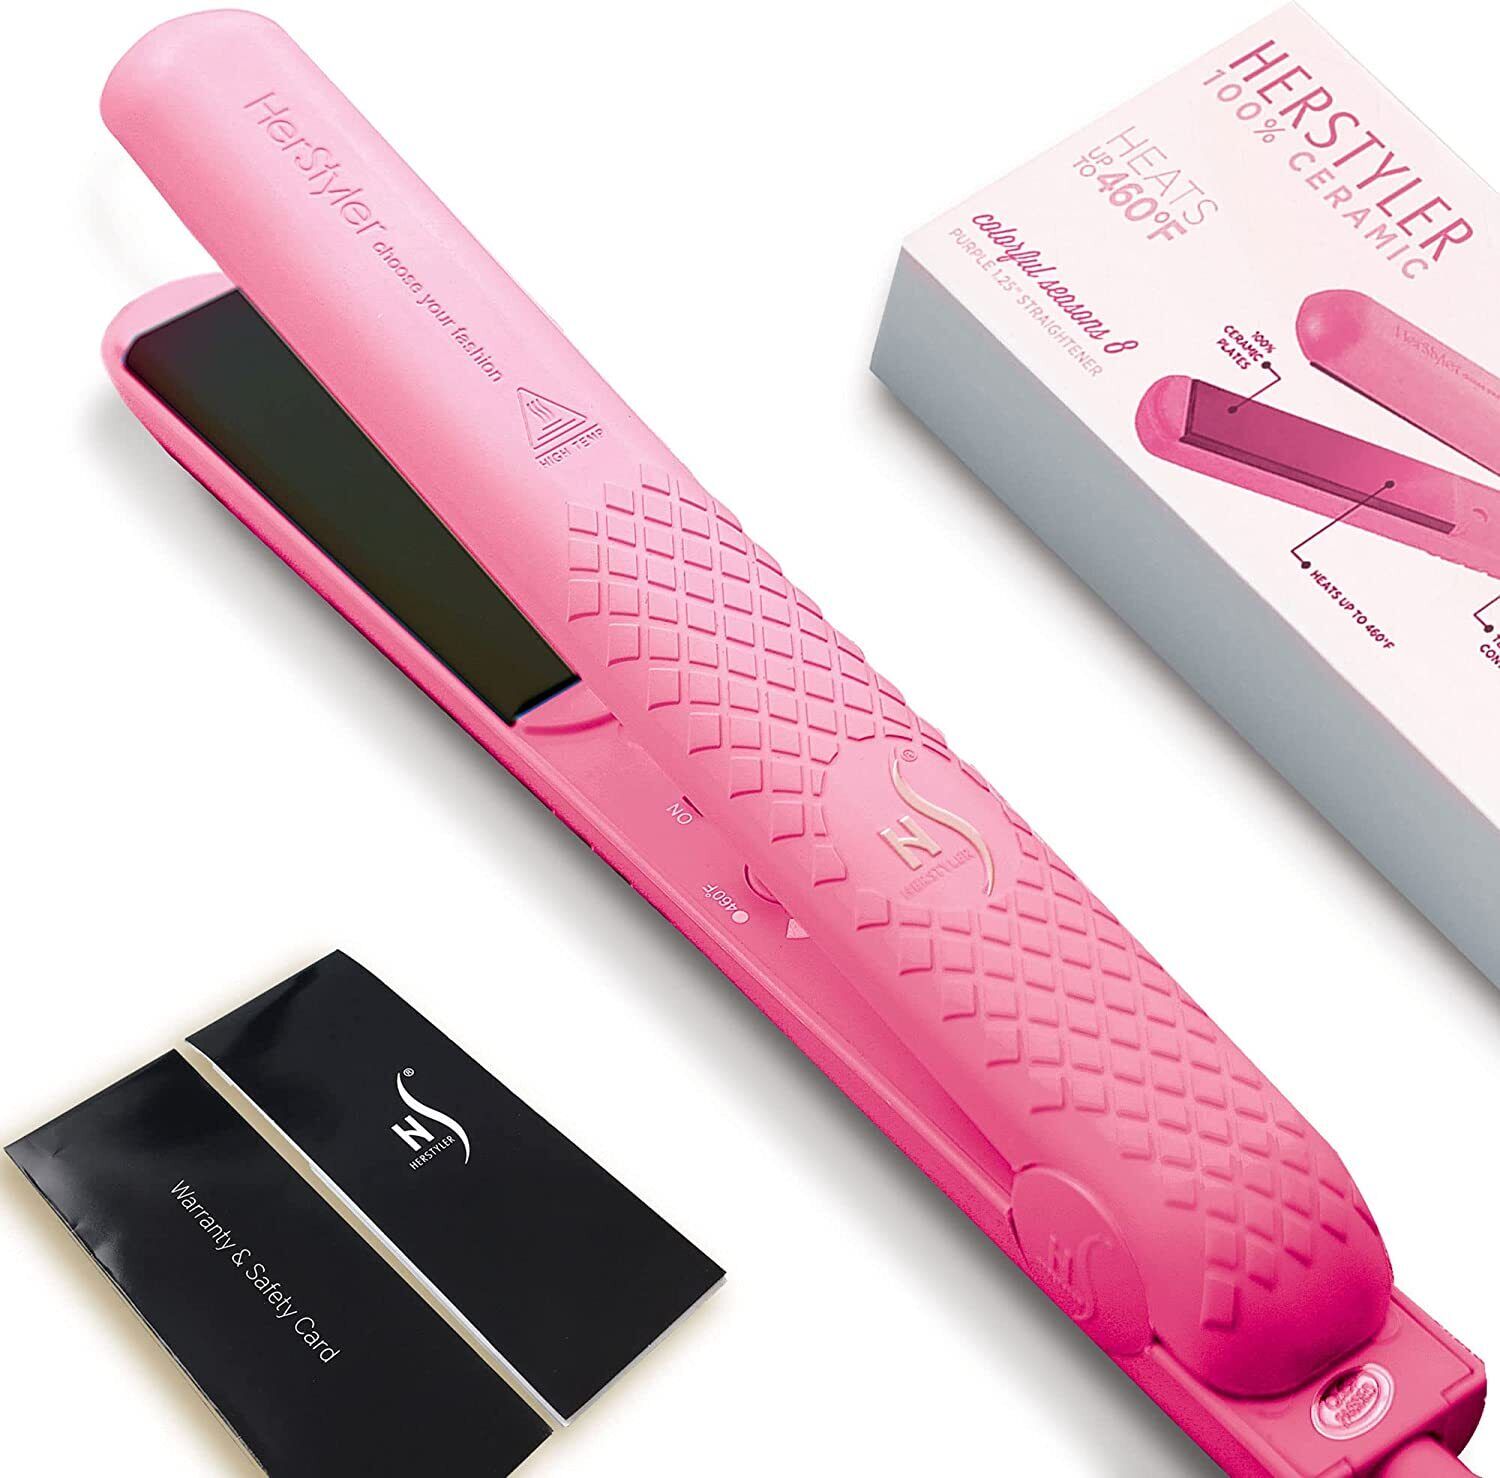 Herstyler Colorful Pink Ceramic 1.25 inch Travel Friendly Dual Voltage Flat Iron